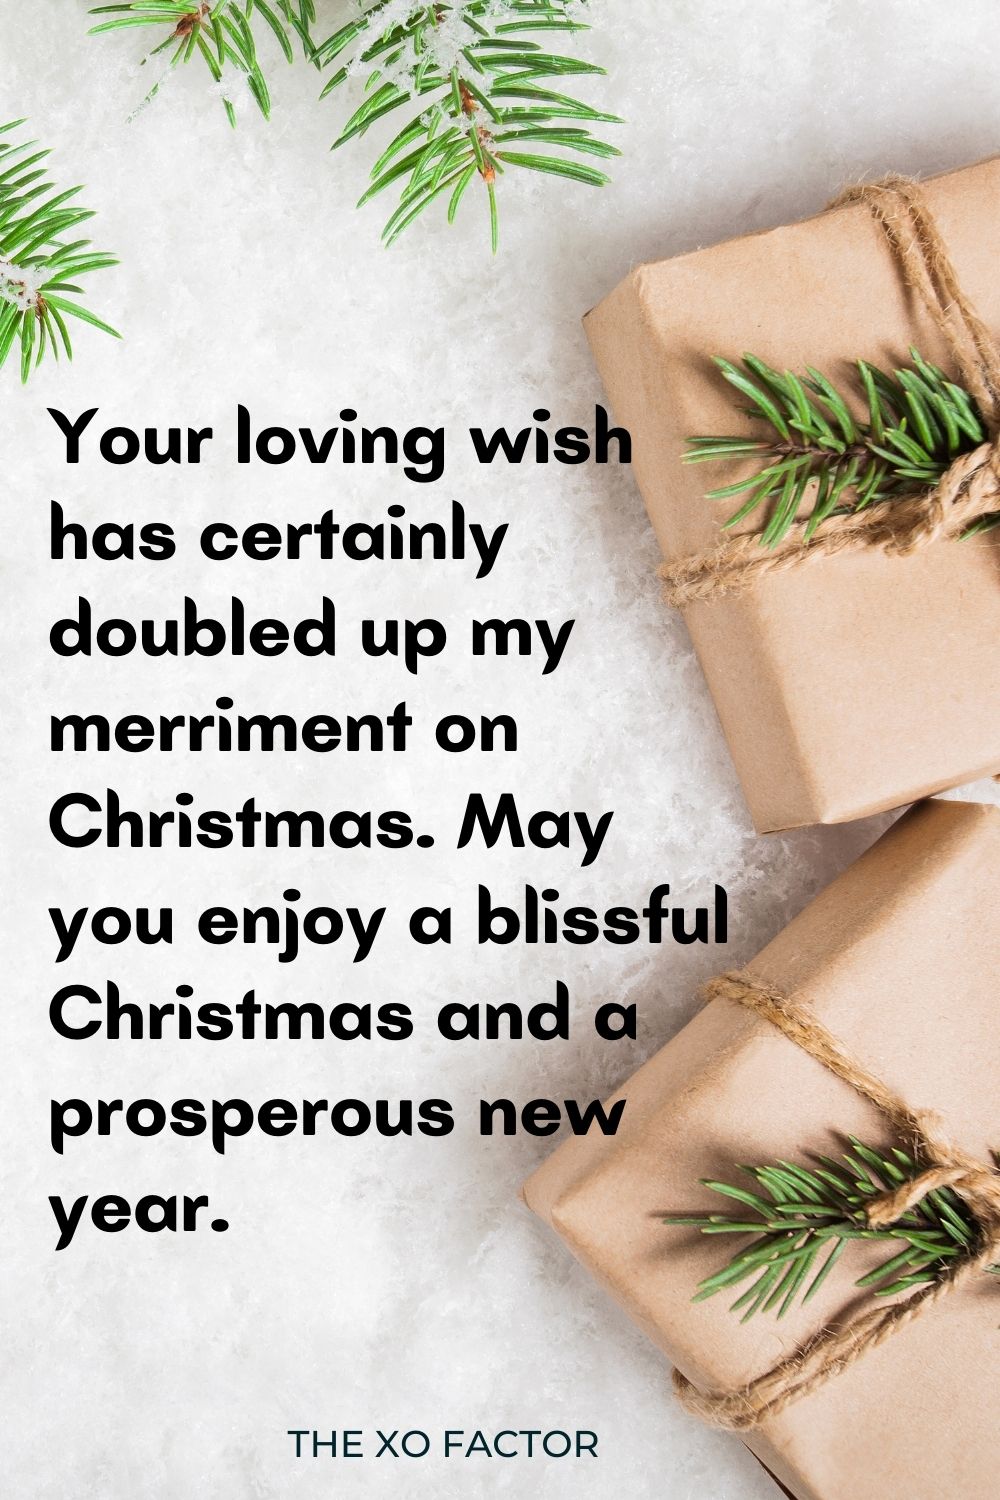 Your loving wish has certainly doubled up my merriment on Christmas. May you enjoy a blissful Christmas and a prosperous new year.